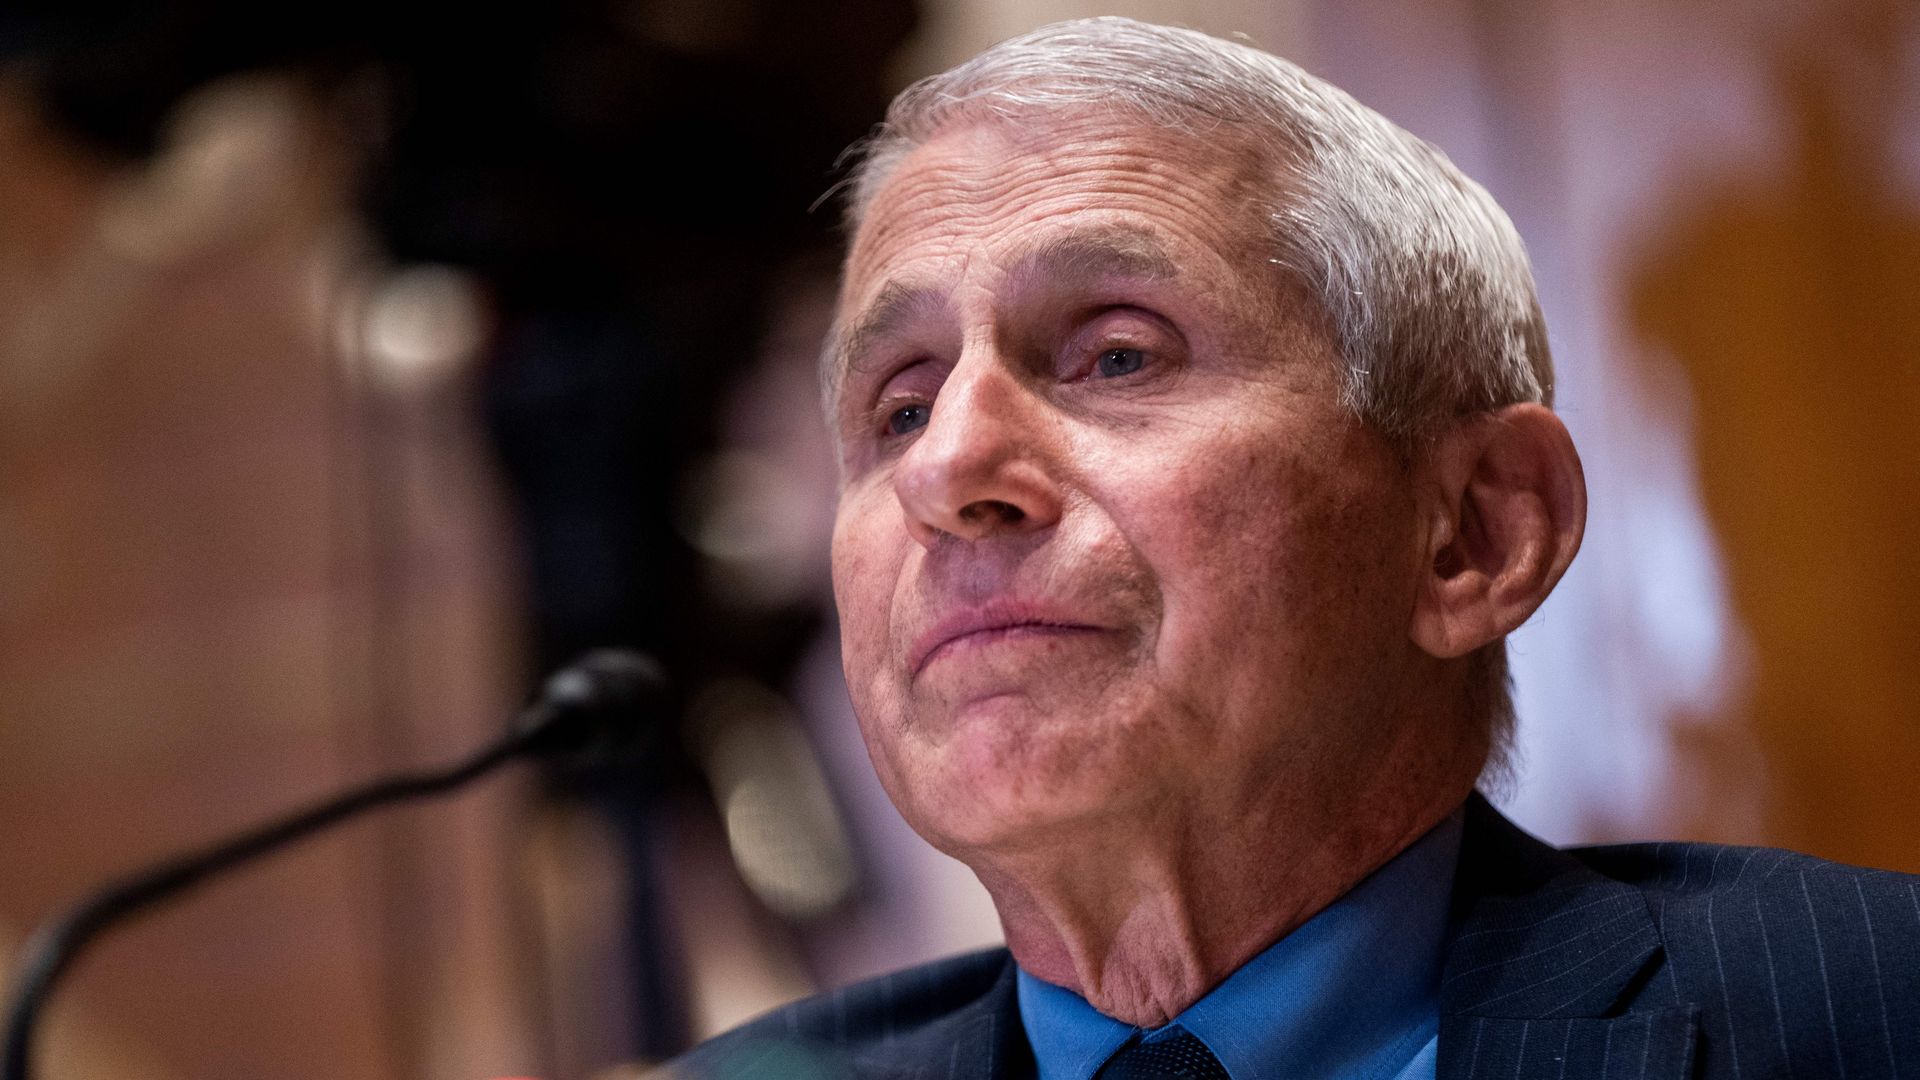 Dr. Anthony Fauci testifies during a Senate hearing.